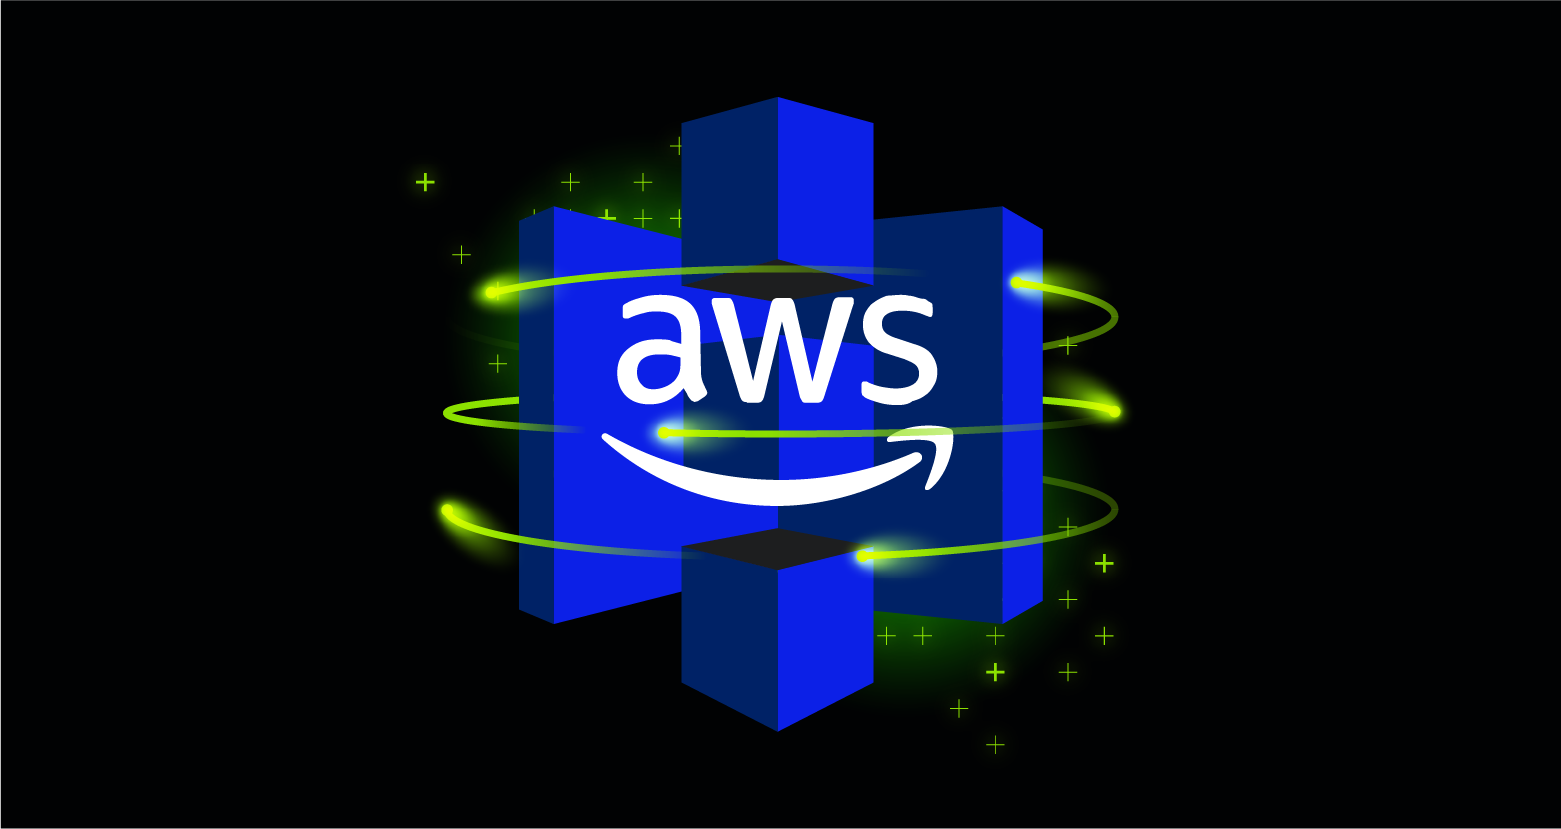 varonis-adds-automated-remediation-for-aws-to-industry-leading-dspm-capabilities